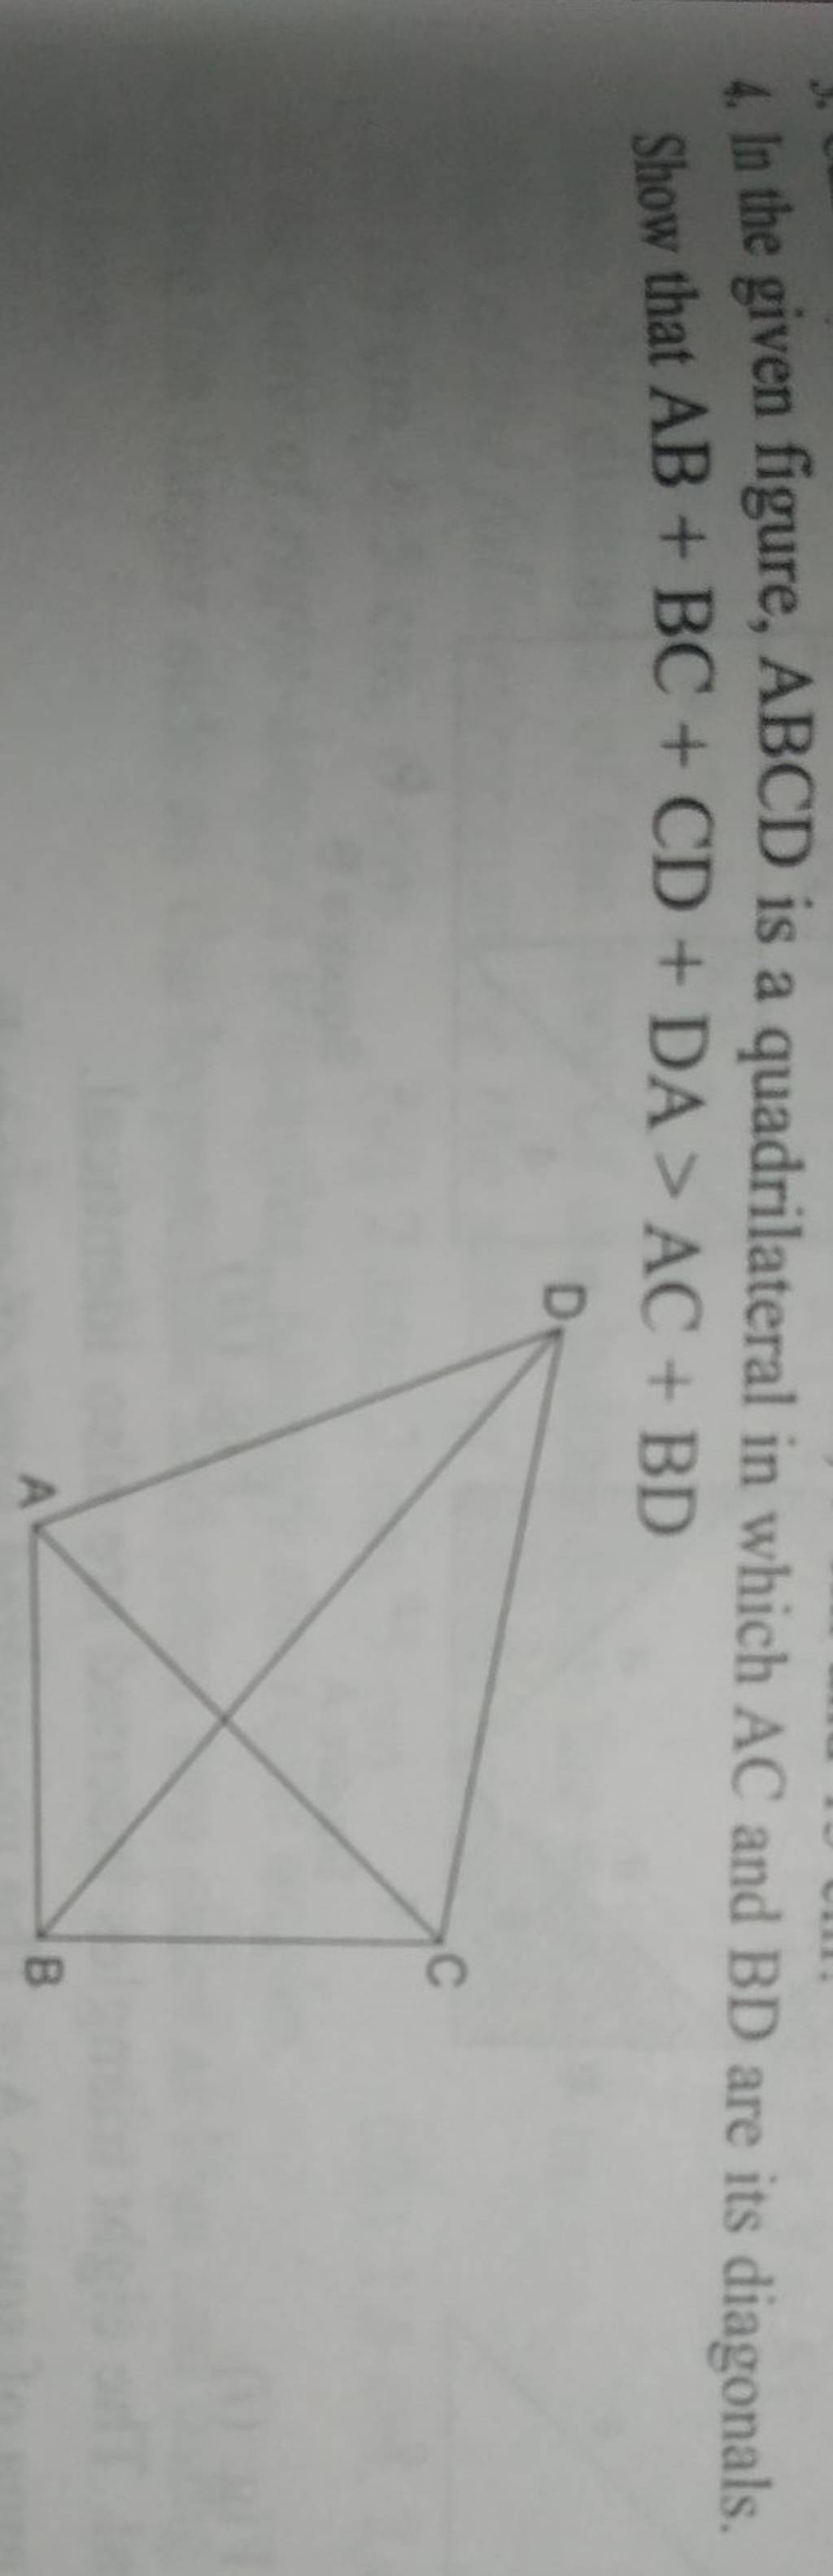 4 In The Given Figure Abcd Is A Quadrilateral In Which Ac And Bd Are It 5689